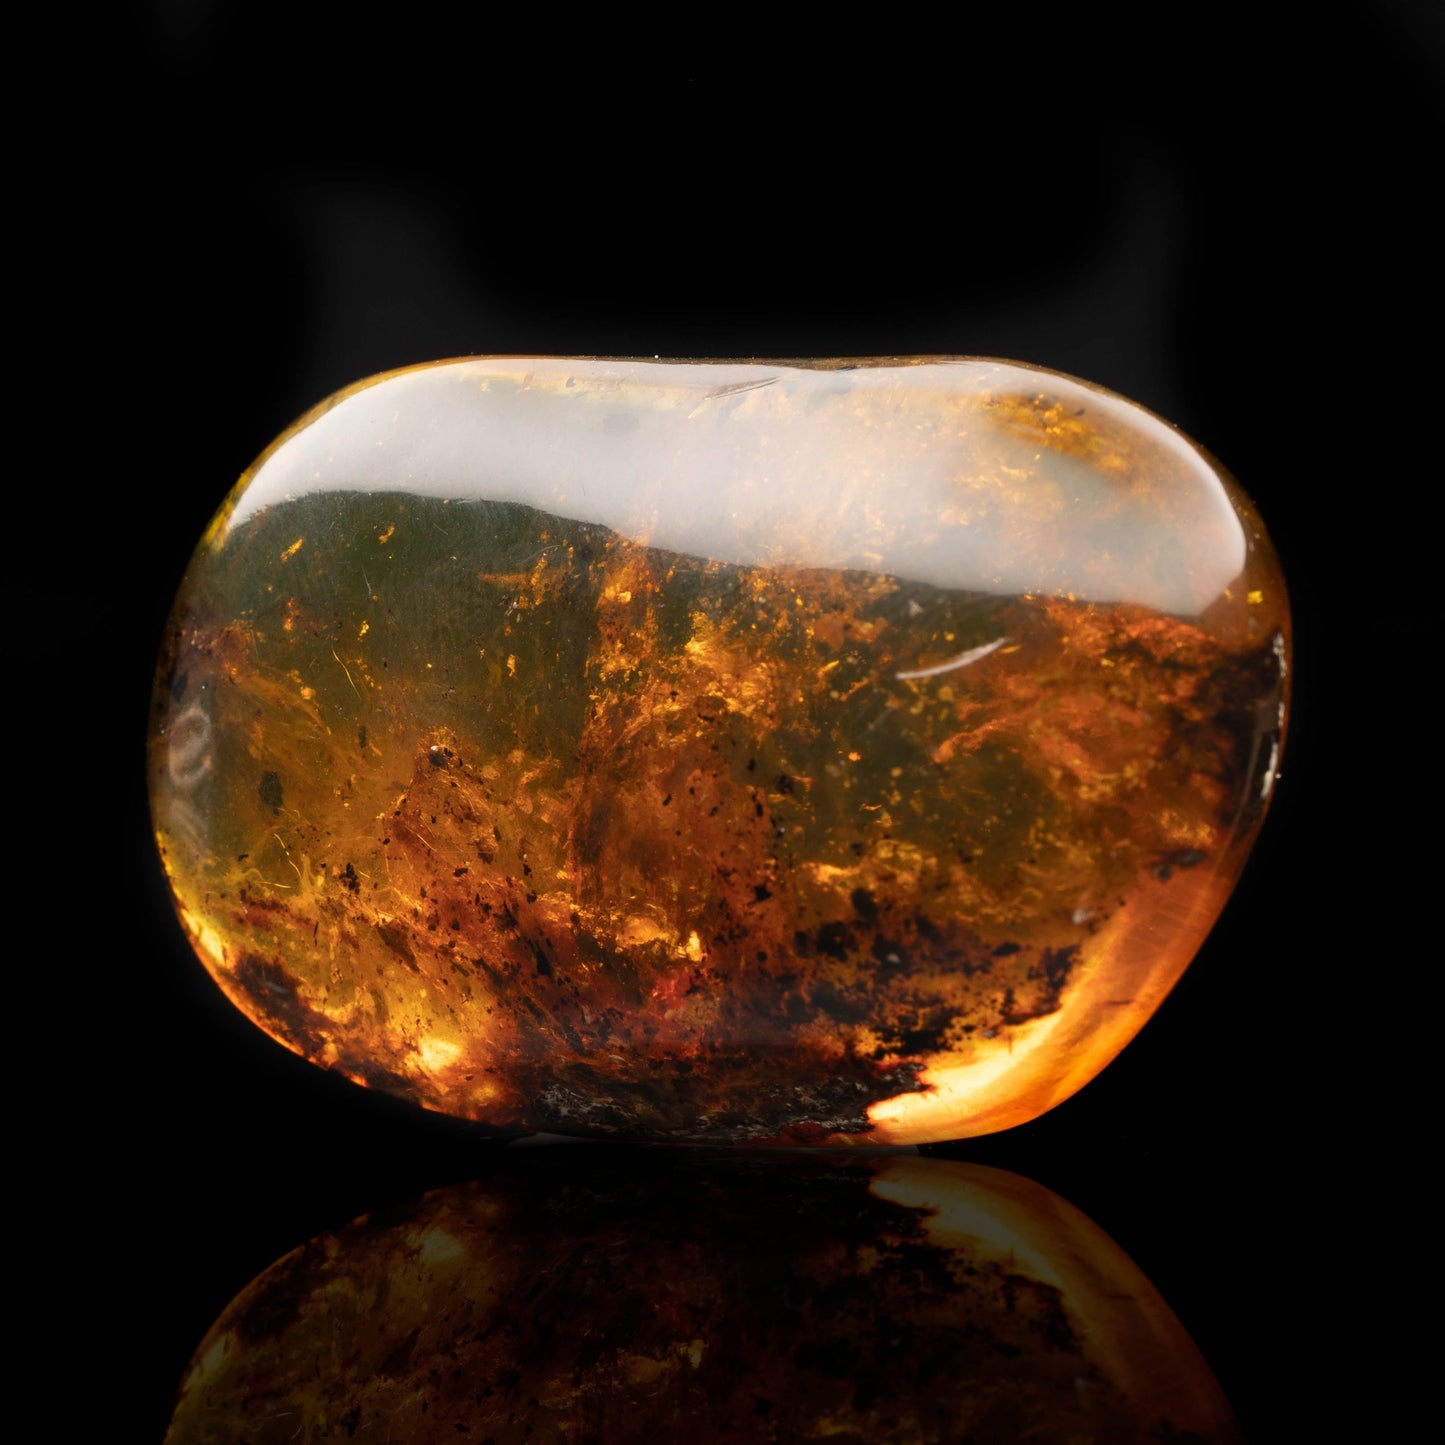 Baltic Amber With Plant Matter // 26.15 Grams